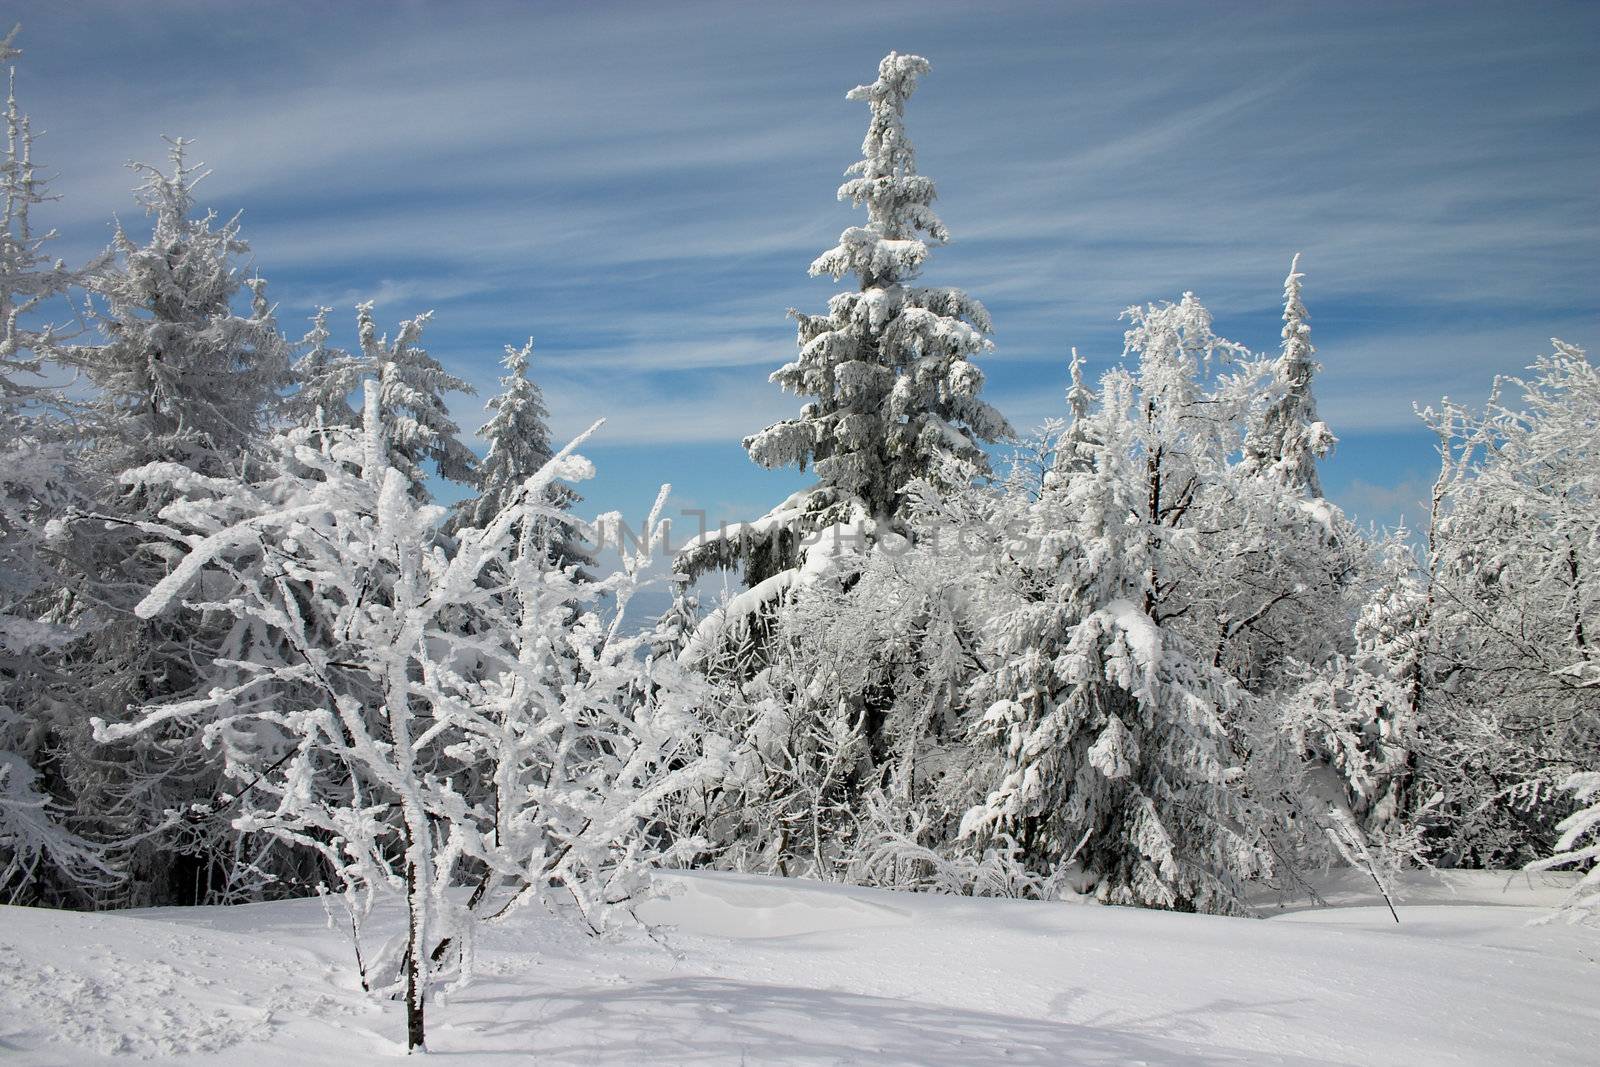 Snowy trees, firs, and bushes under snow with light clouds